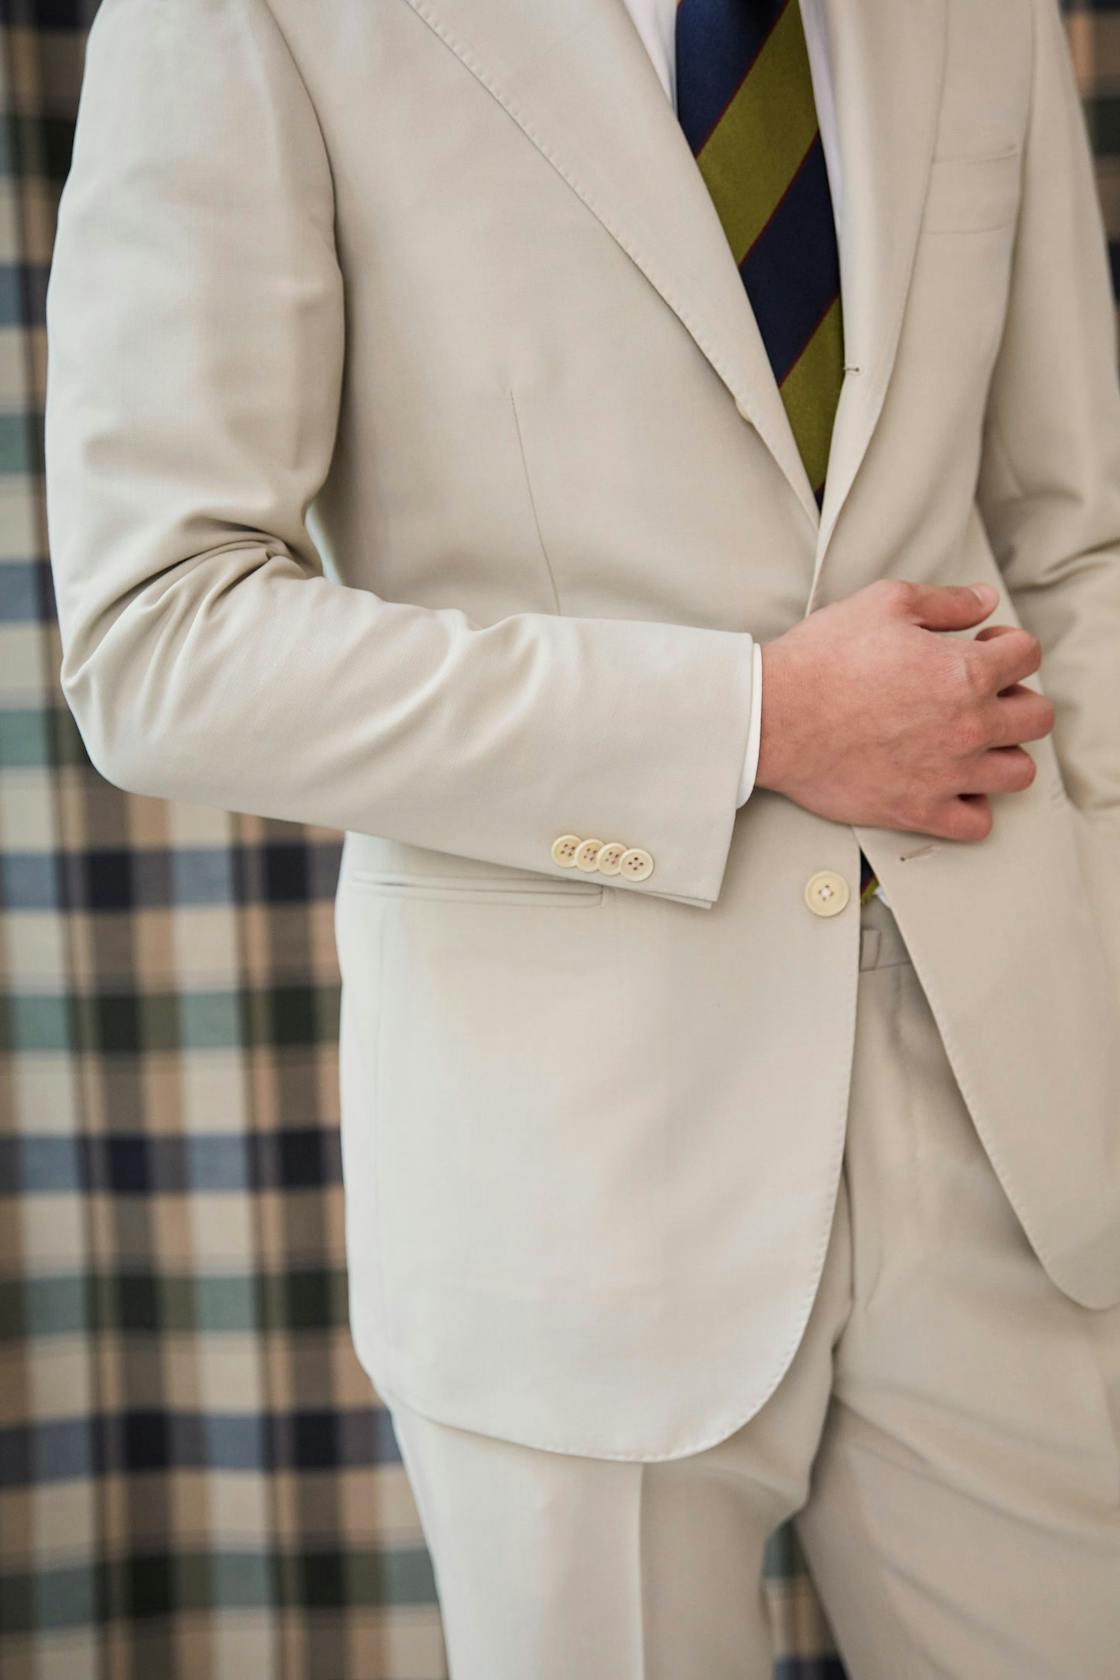 Ring Jacket 269 Cream Wool Canvas Suit